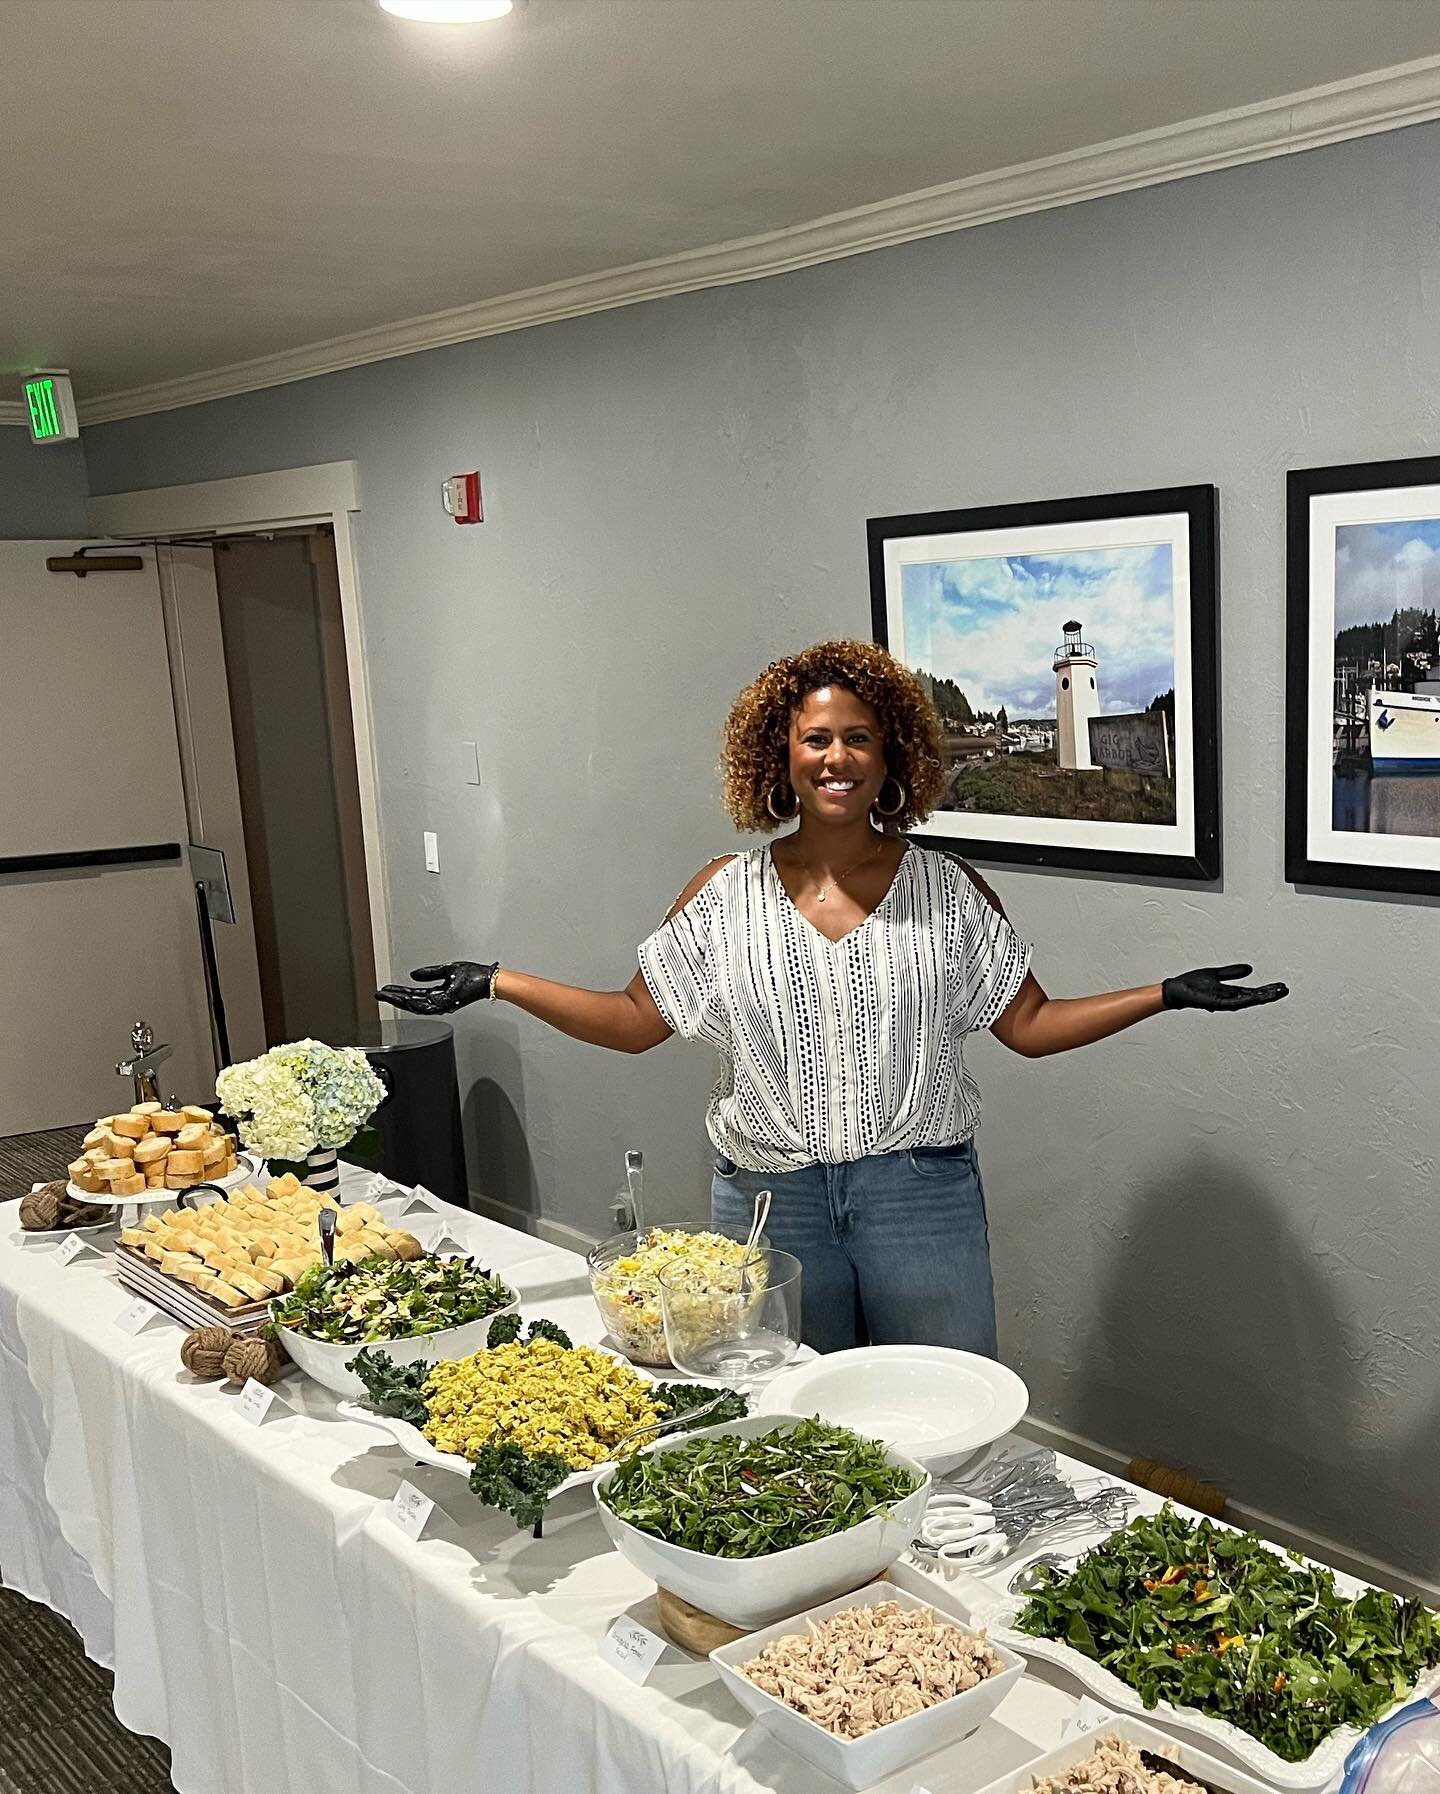 Lauren is the definition of humble greatness. Everything she touches come to life and she truly knows how to make everyone in her presence feel seen. Today she catered for a group of 85 +women🙌🏾 Her garden to table salads with smoked chicken (by yo